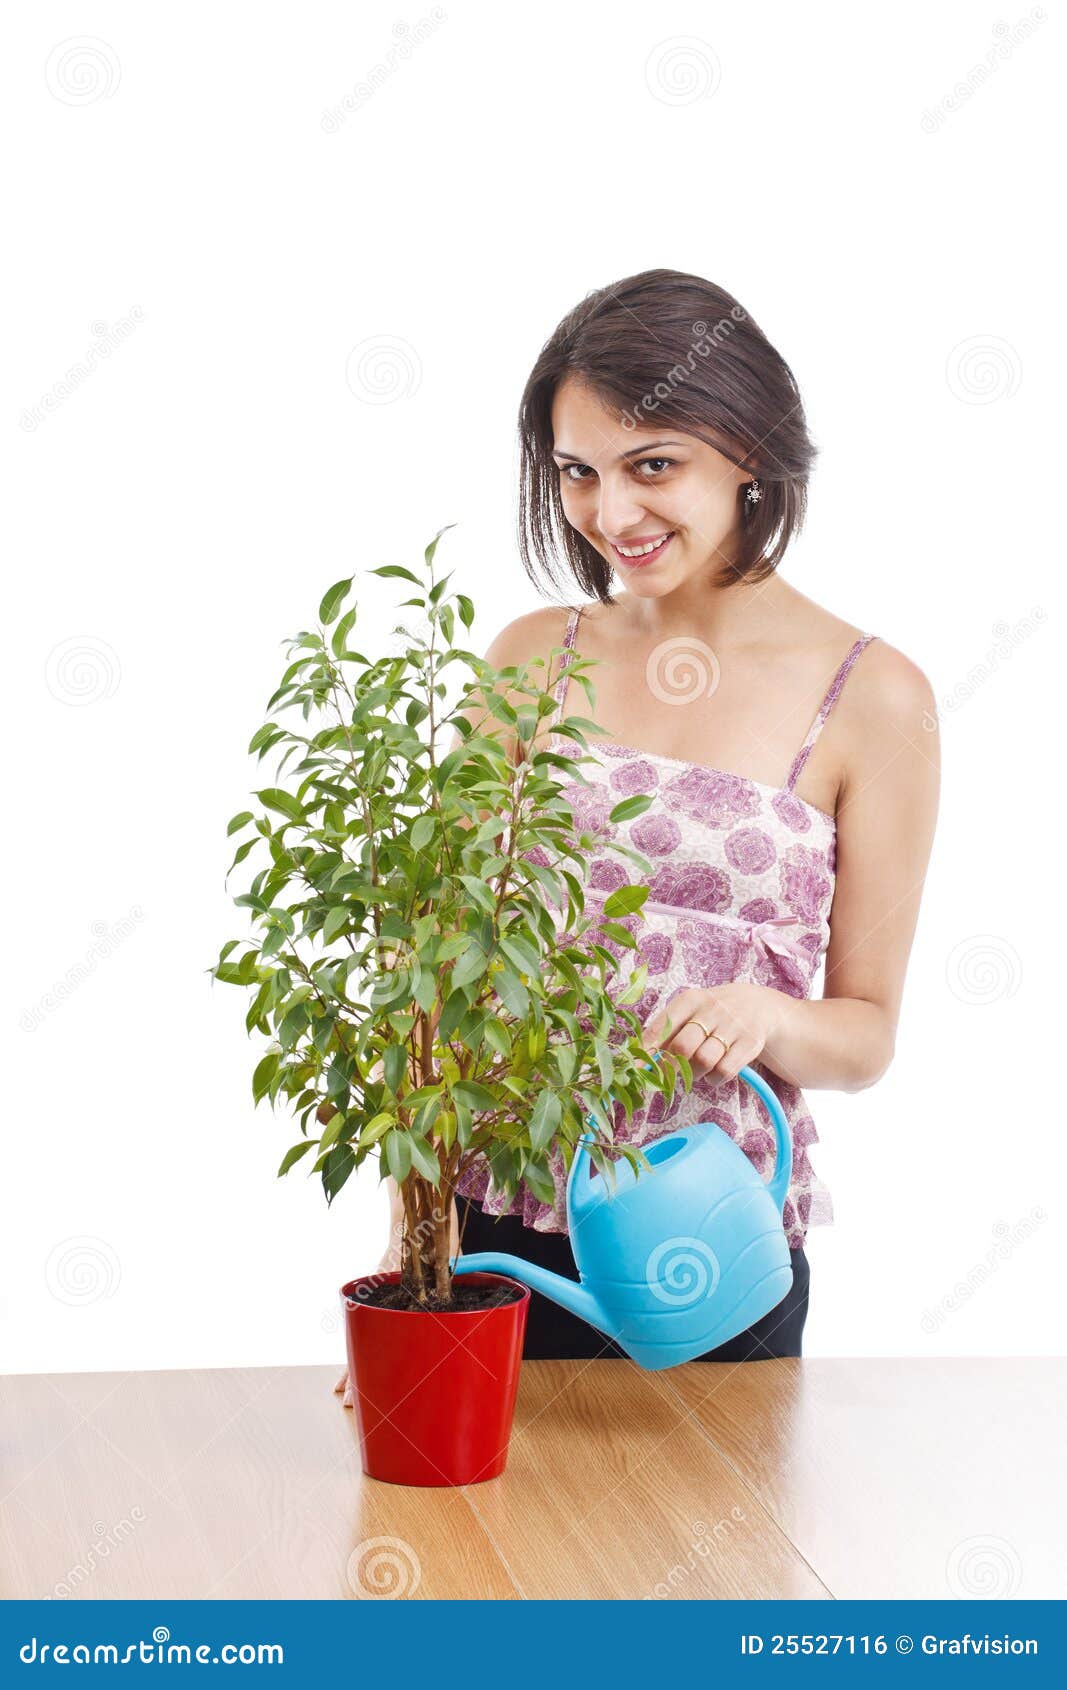 young woman irrigate plants